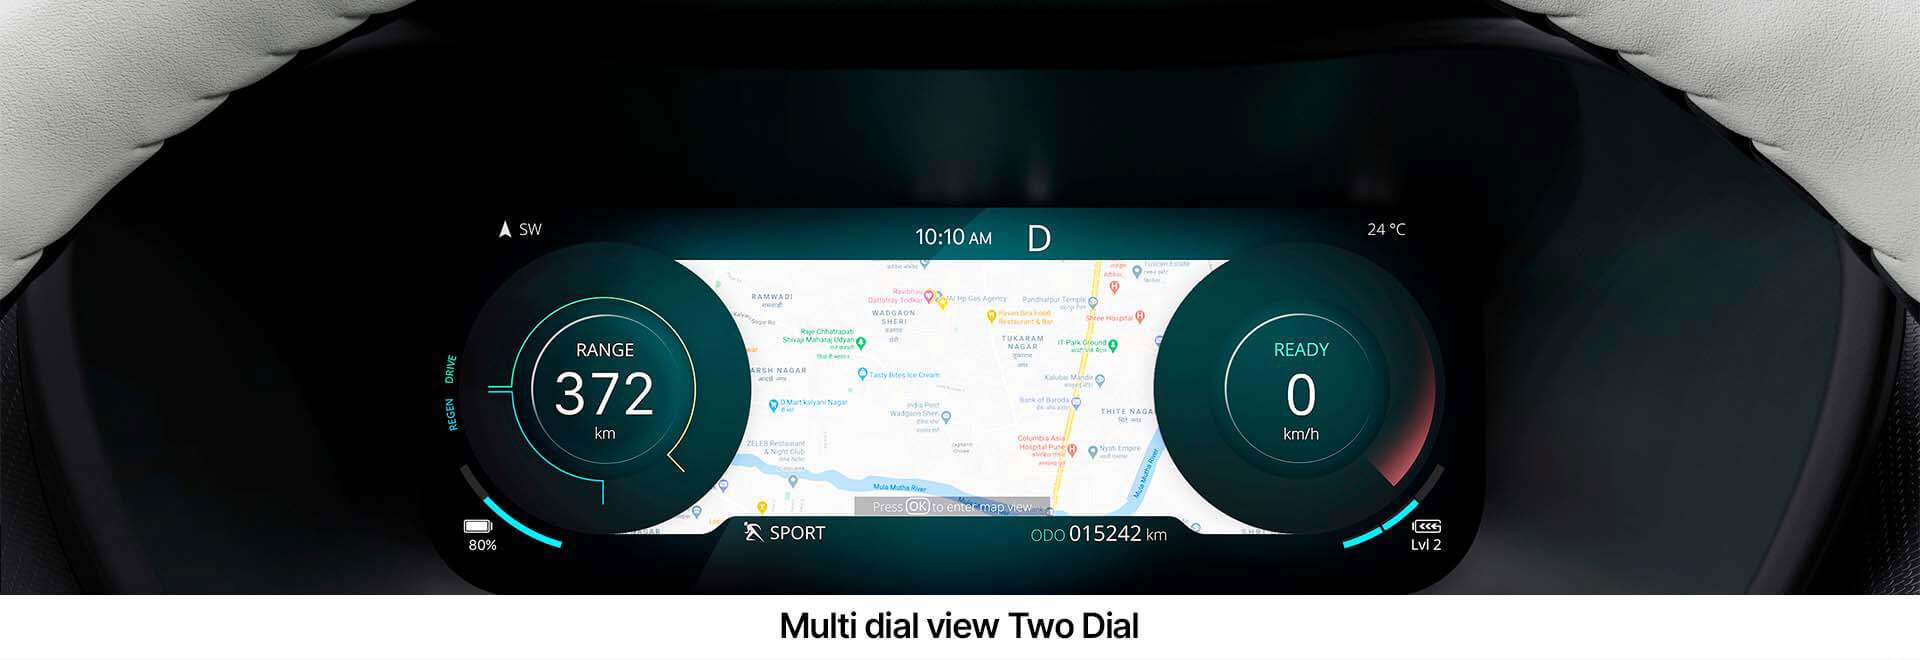 2-Dial-View-with-Navigation_1920x660.jpg